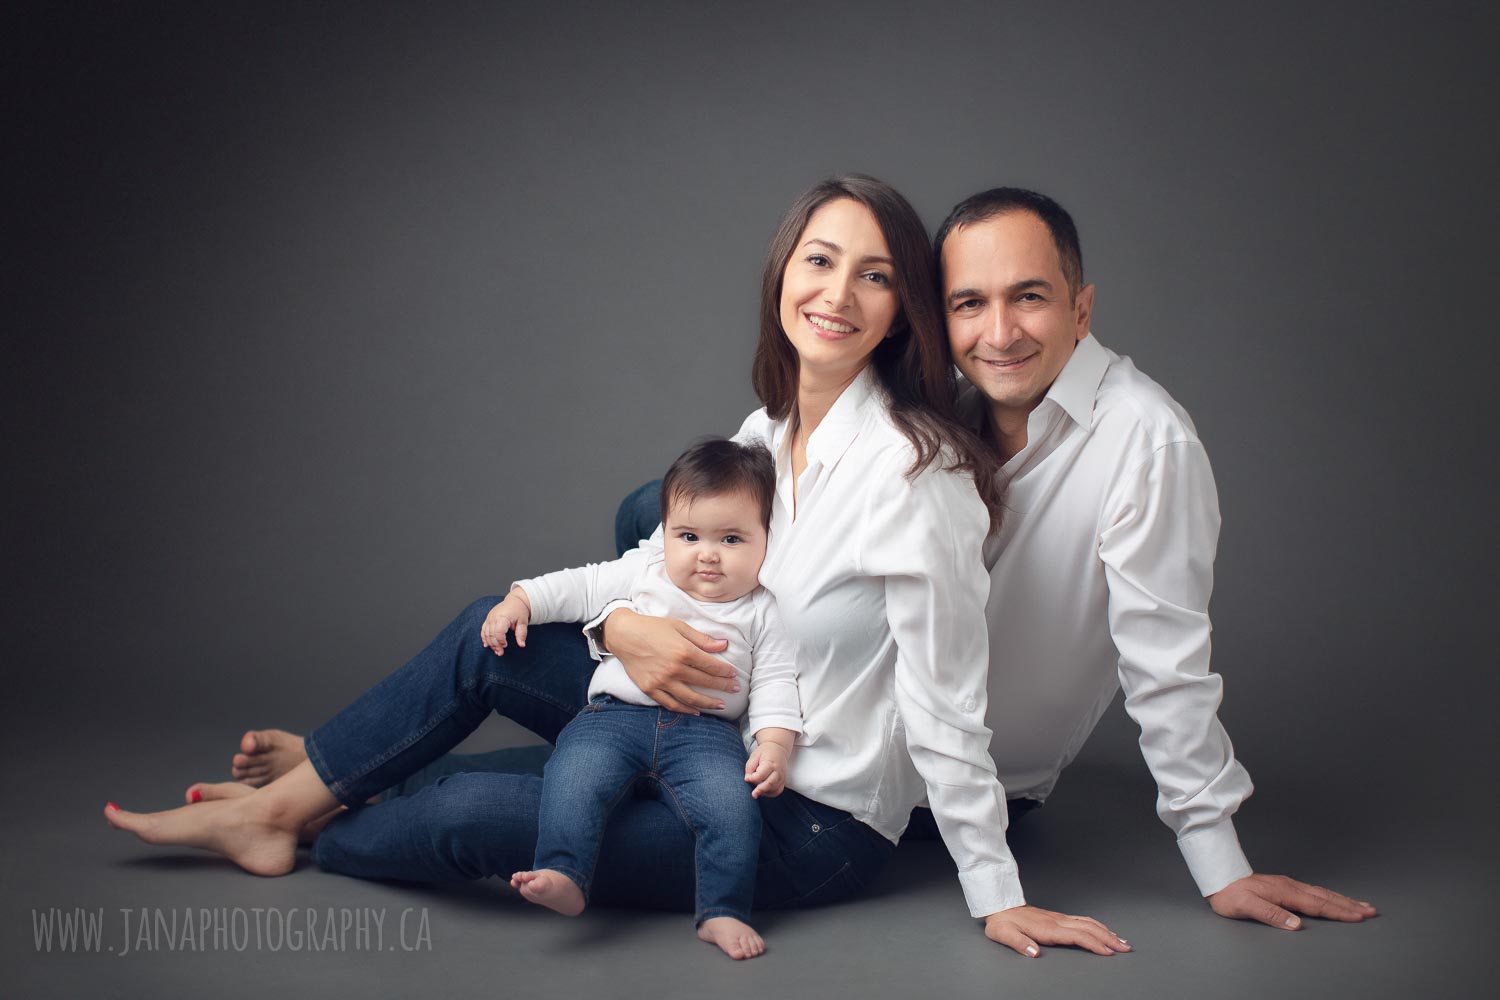 Parents with 6 month baby girl sitting with white shirts and black background